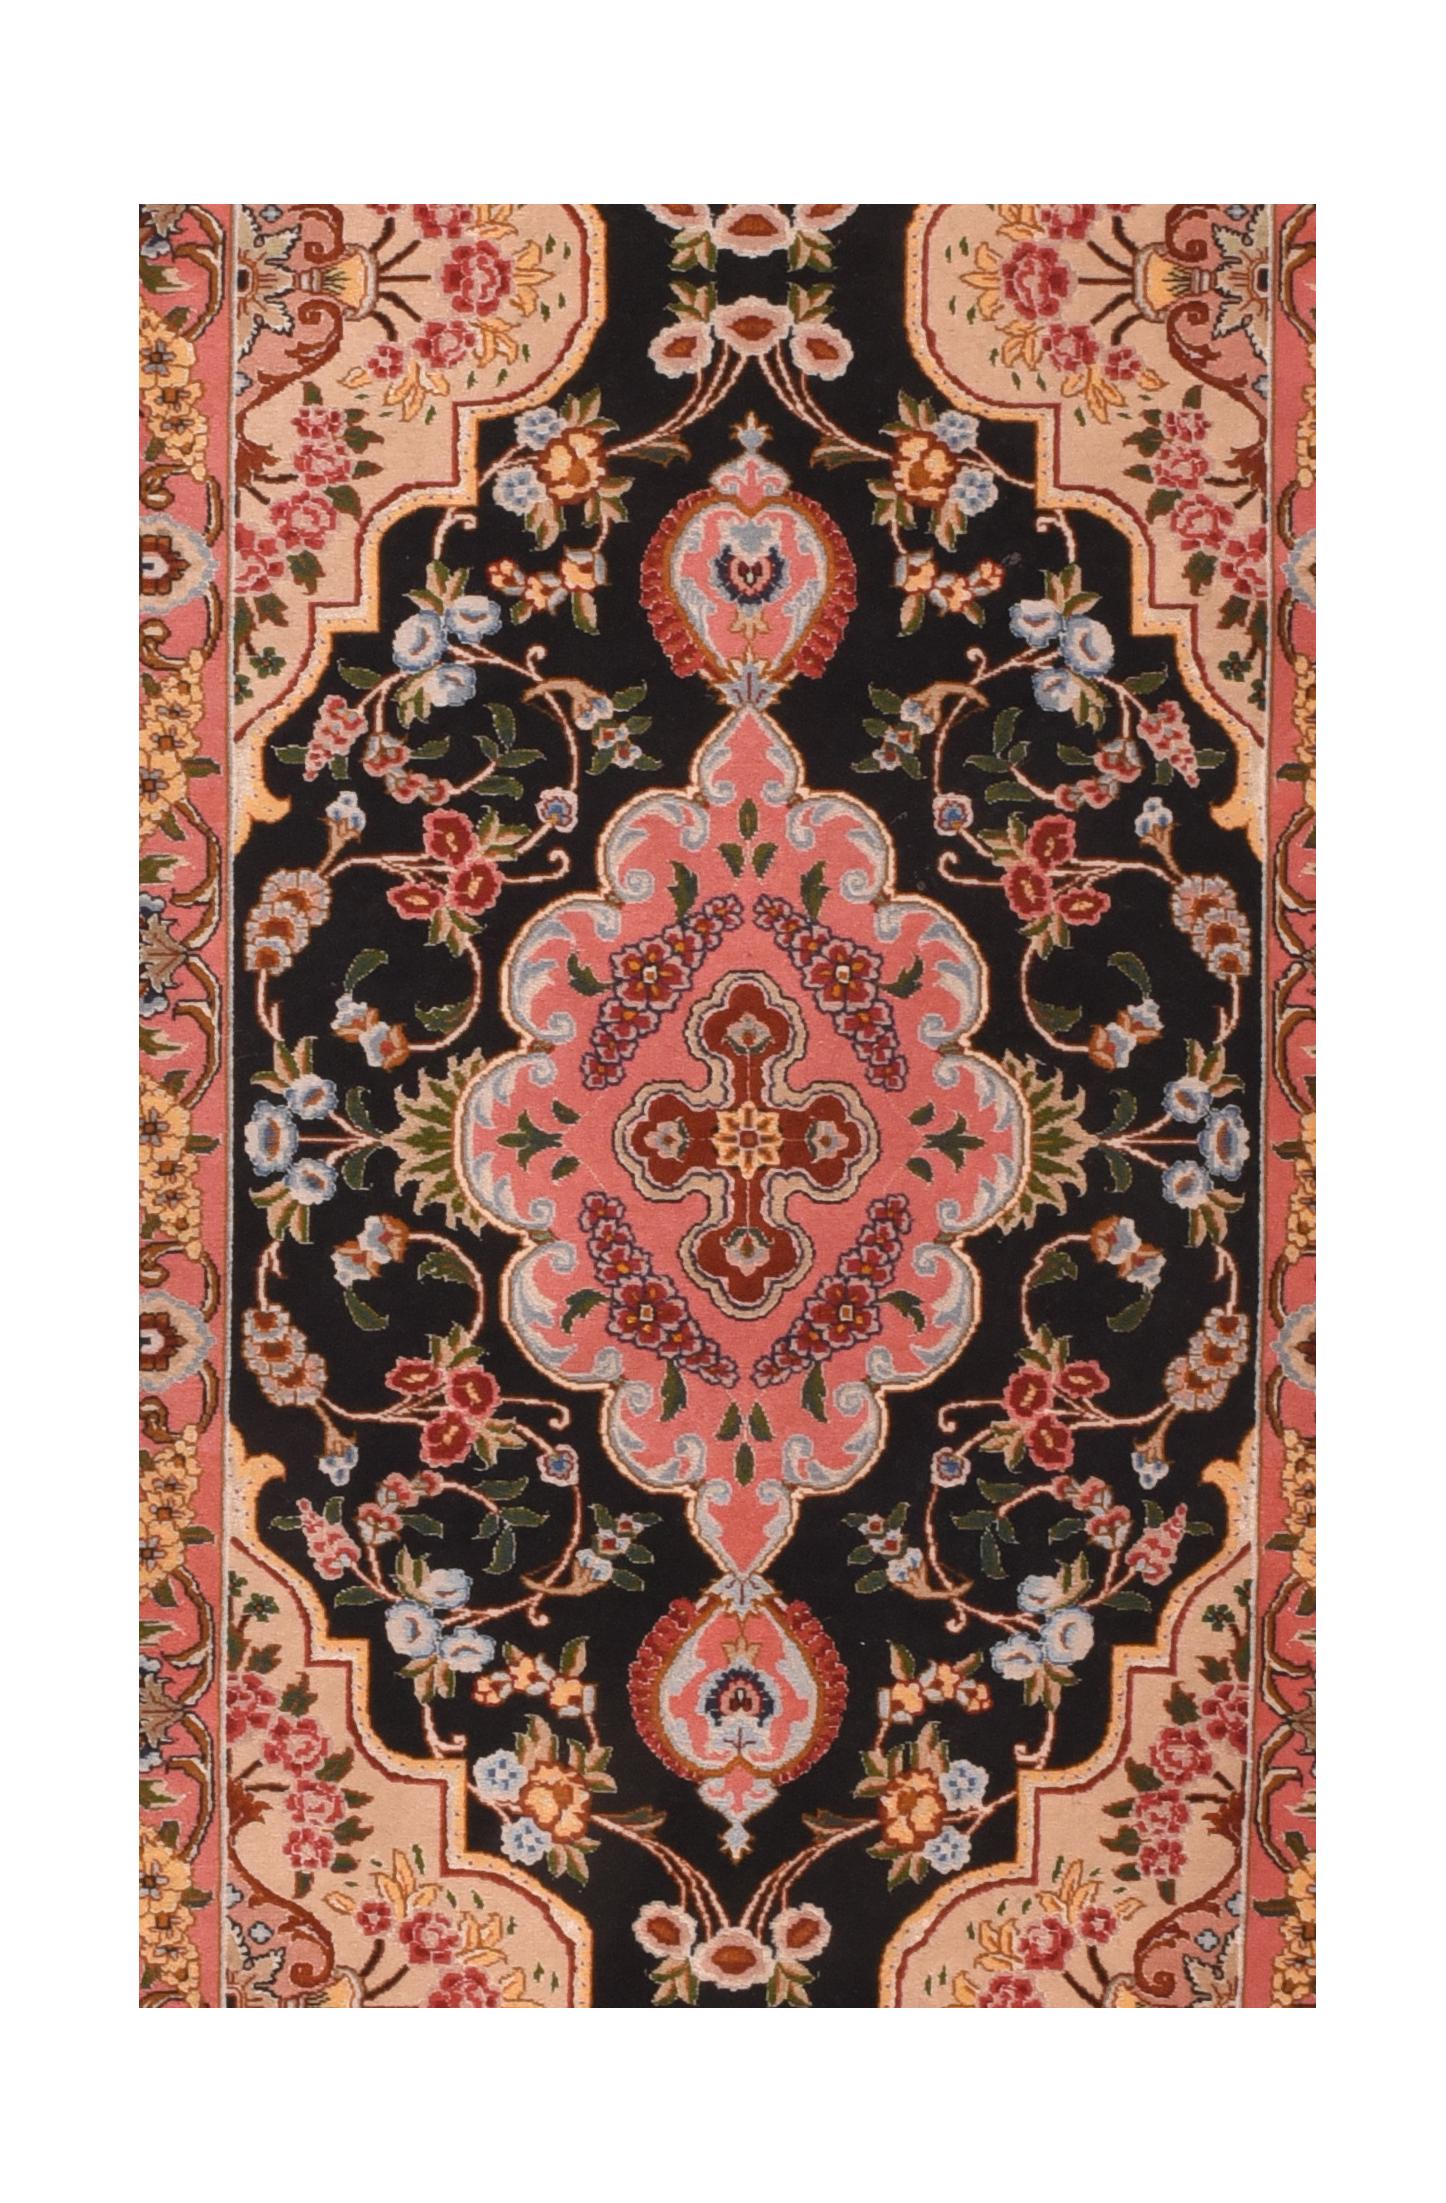 A Tabriz rug/carpet is a type in the general category of Persian carpets from the city of Tabriz, the capital city of East Azarbaijan Province in north west of Iran totally populated by Azerbaijanis. It is one of the oldest rug weaving centers and